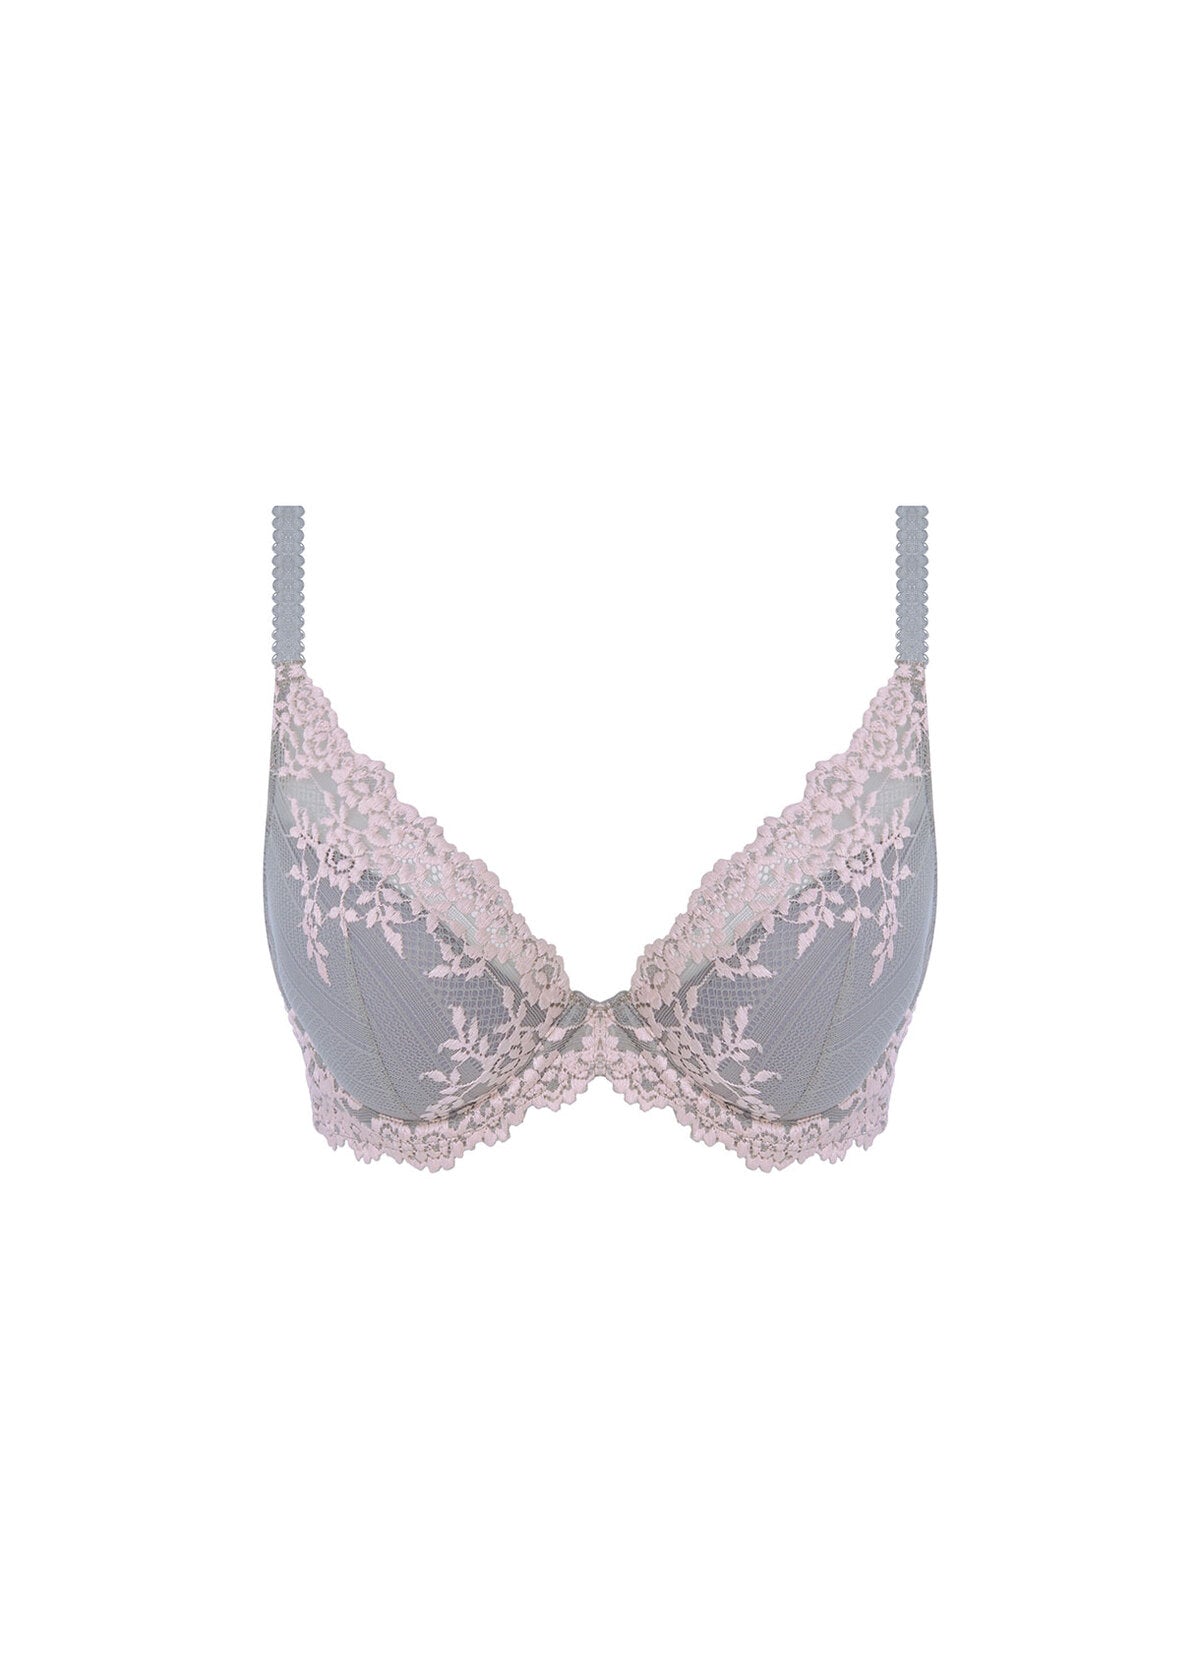 WACOAL EMBRACE LACE Bra 065191 Underwired Full Cup Lace Bras Womens  Lingerie £41.40 - PicClick UK